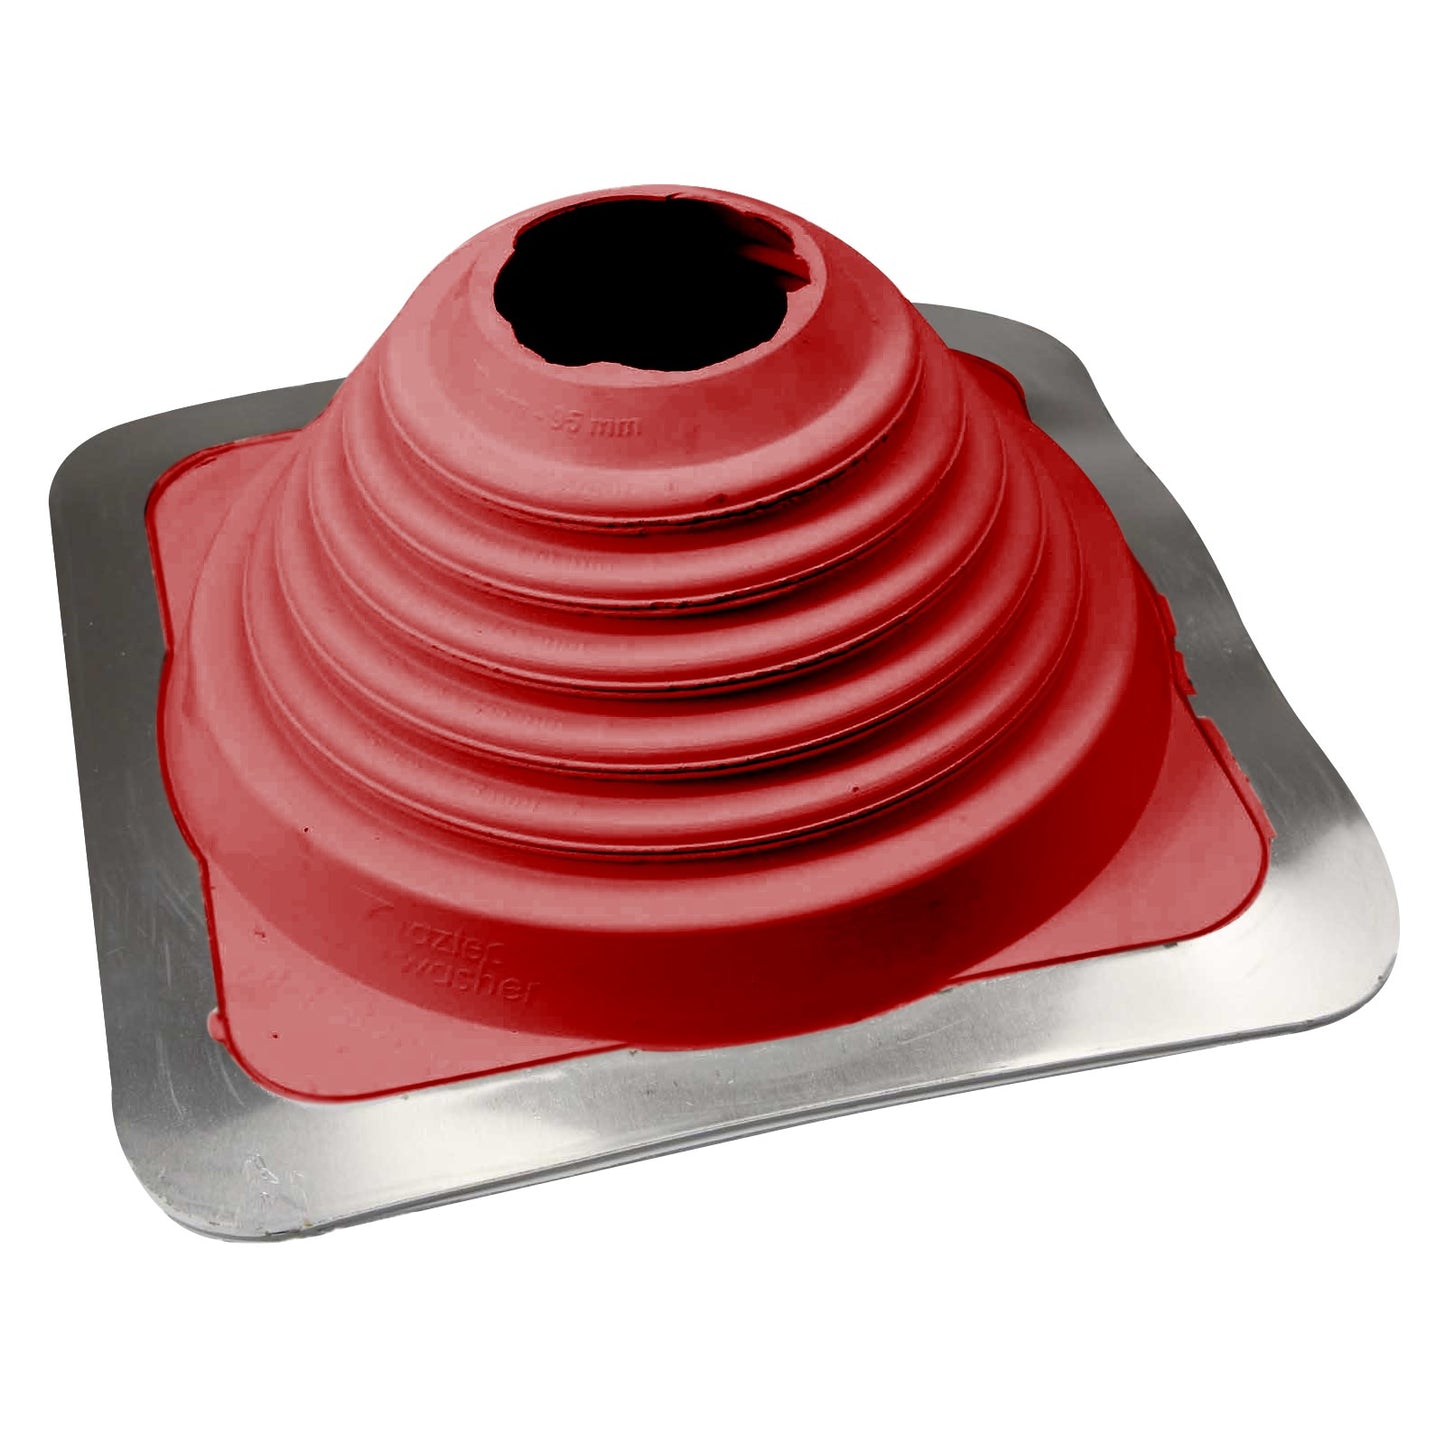 #4 Roofjack Square EPDM Pipe Flashing Boot Bright Red